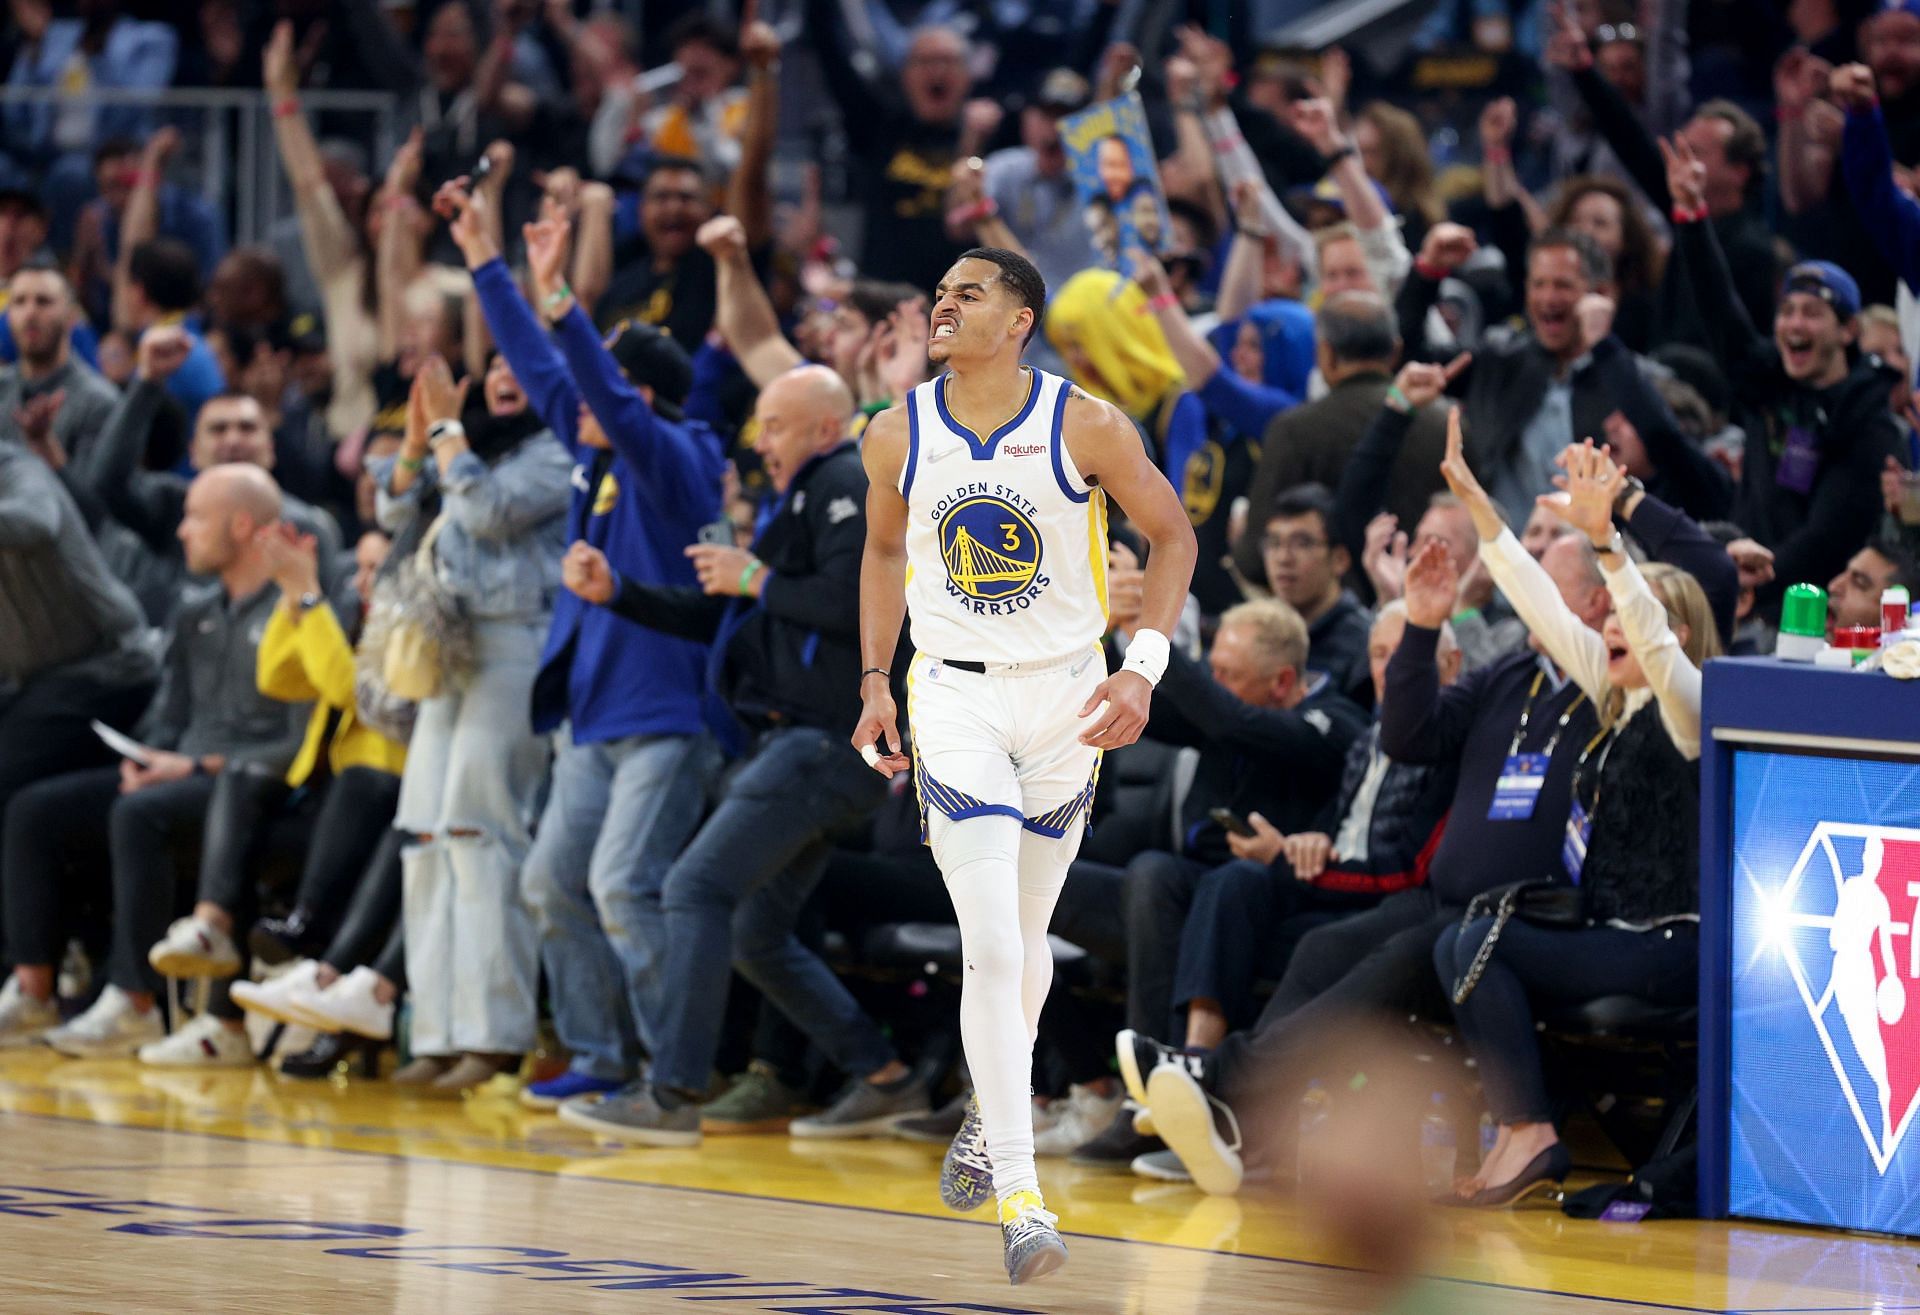 Jordan Poole of the Golden State Warriors reacts after making a 3-pointer against the Denver Nuggets in Game 2 of the first round of the Western Conference playoffs on Monday in San Francisco, California.